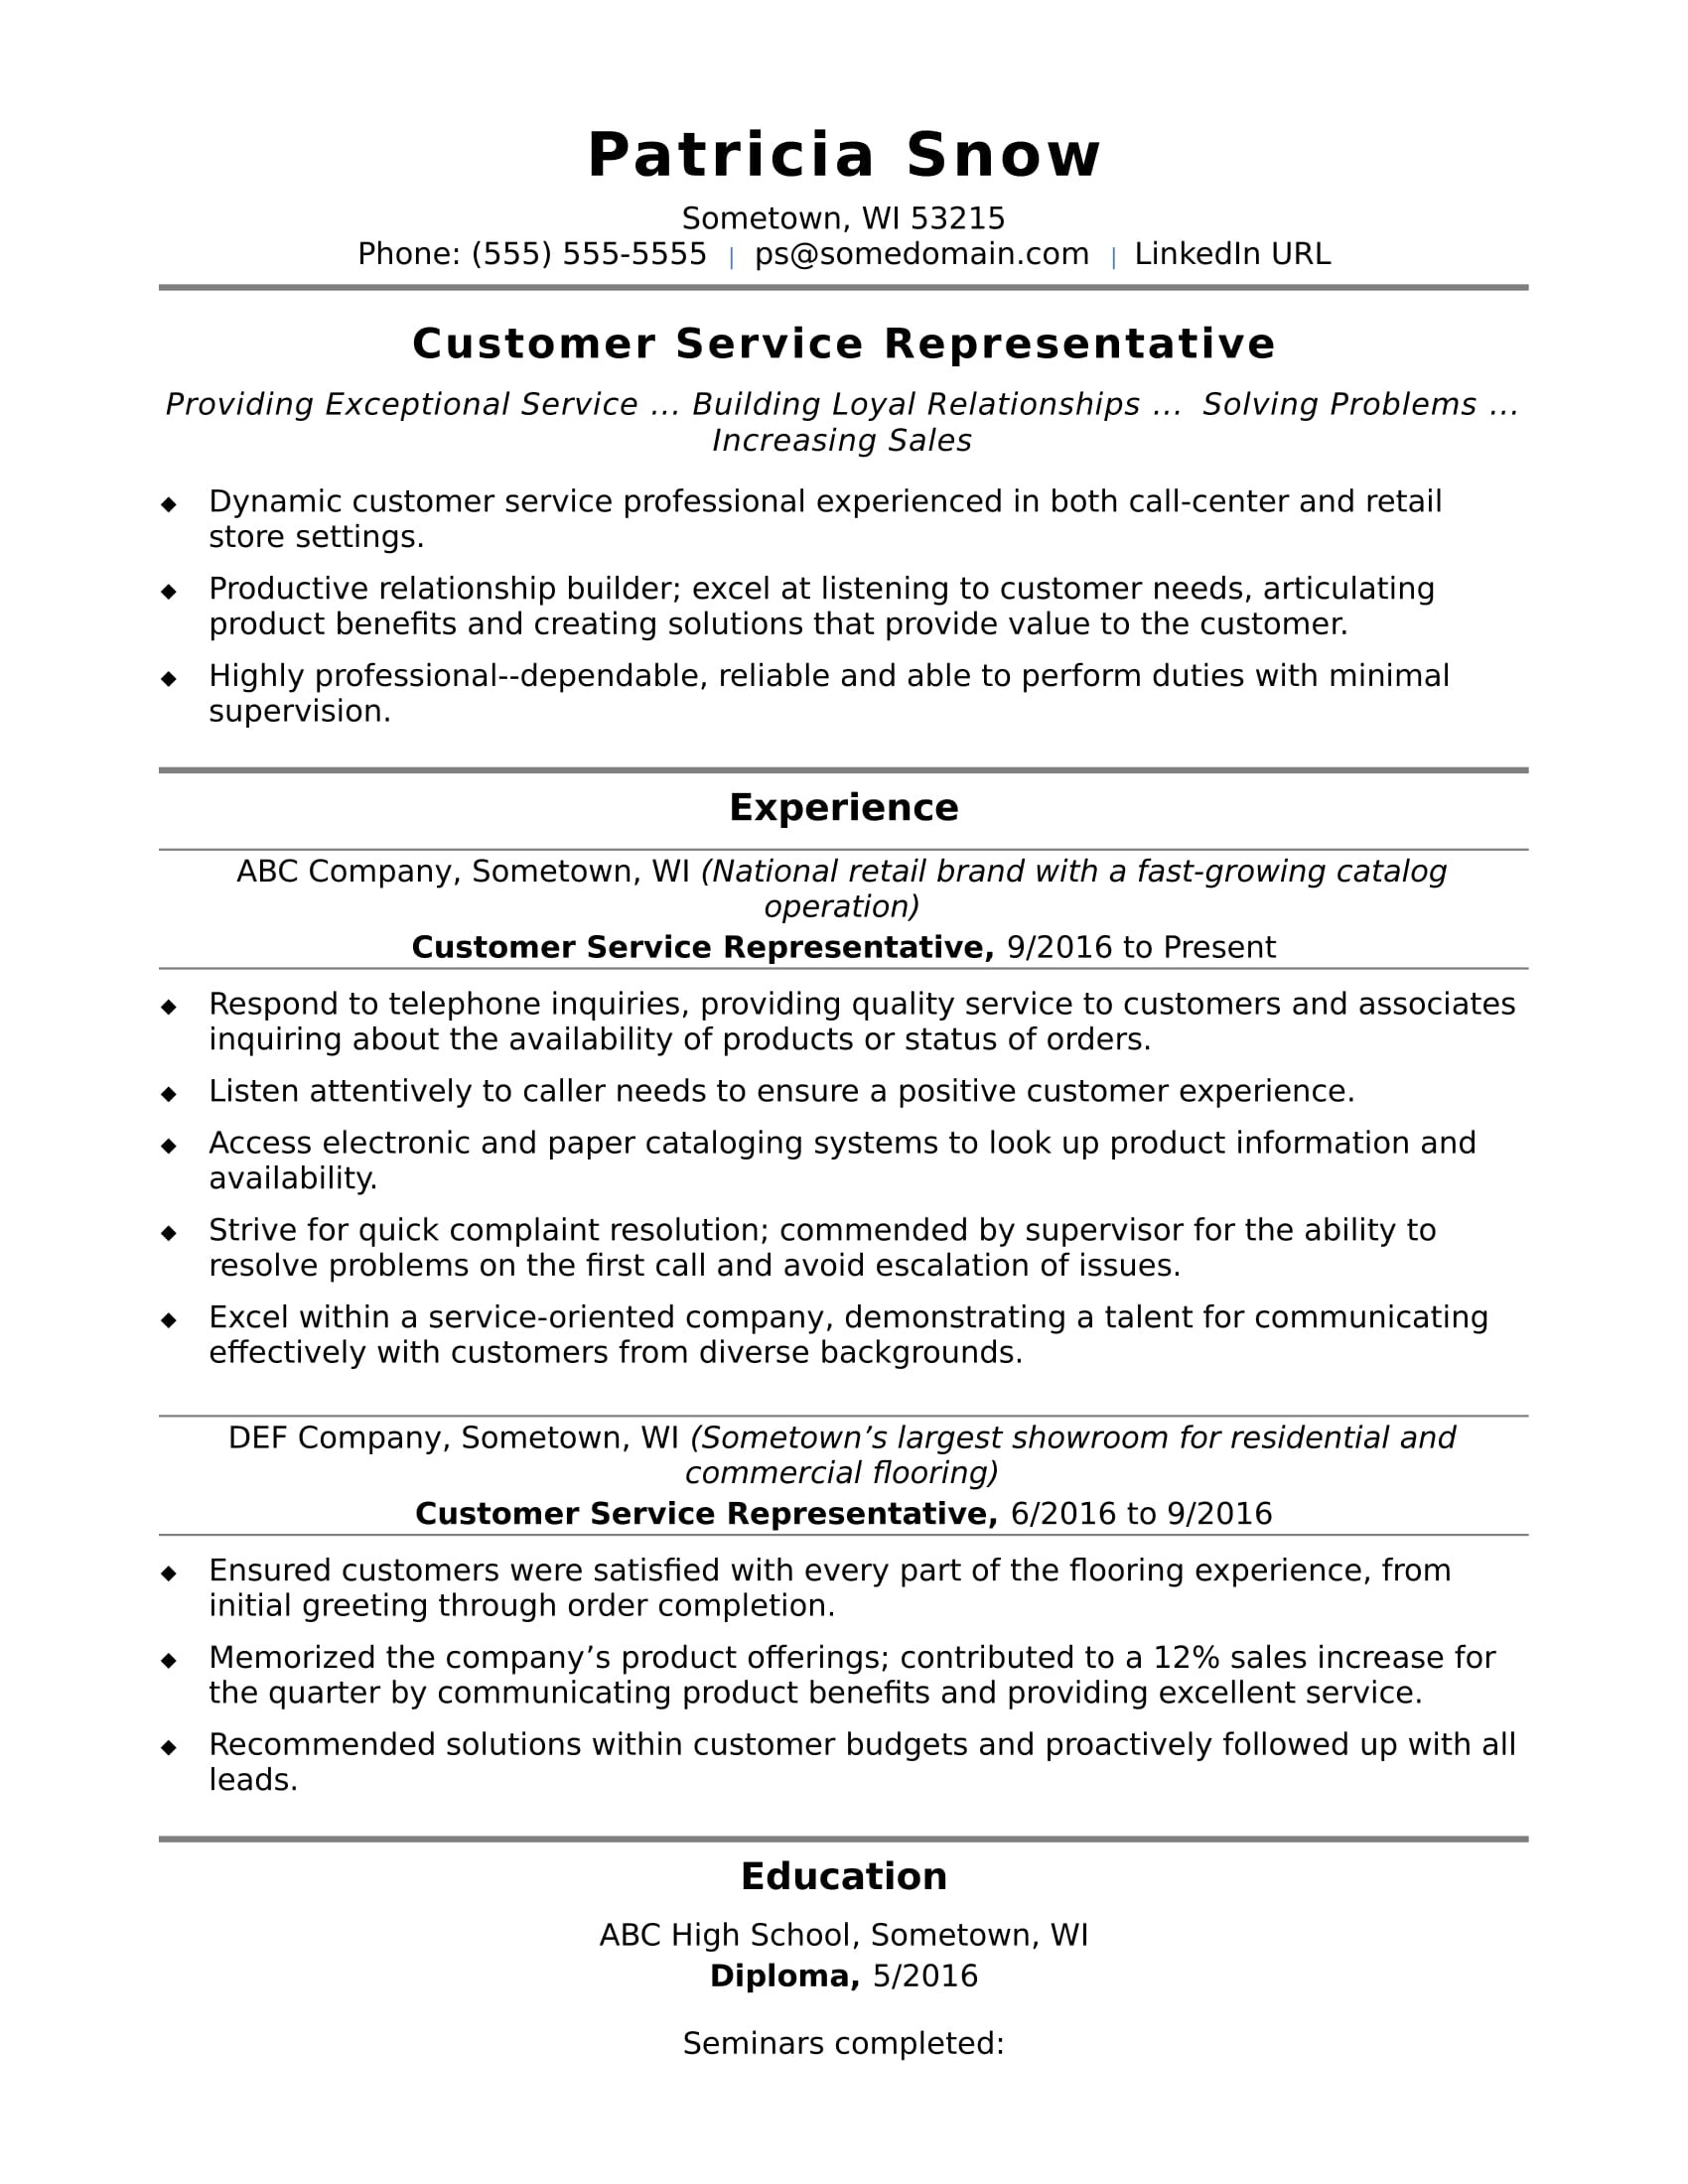 Sample Of A Great Customer Service Resume Customer Service Resume, Skills. Examples and How to Write Like A …